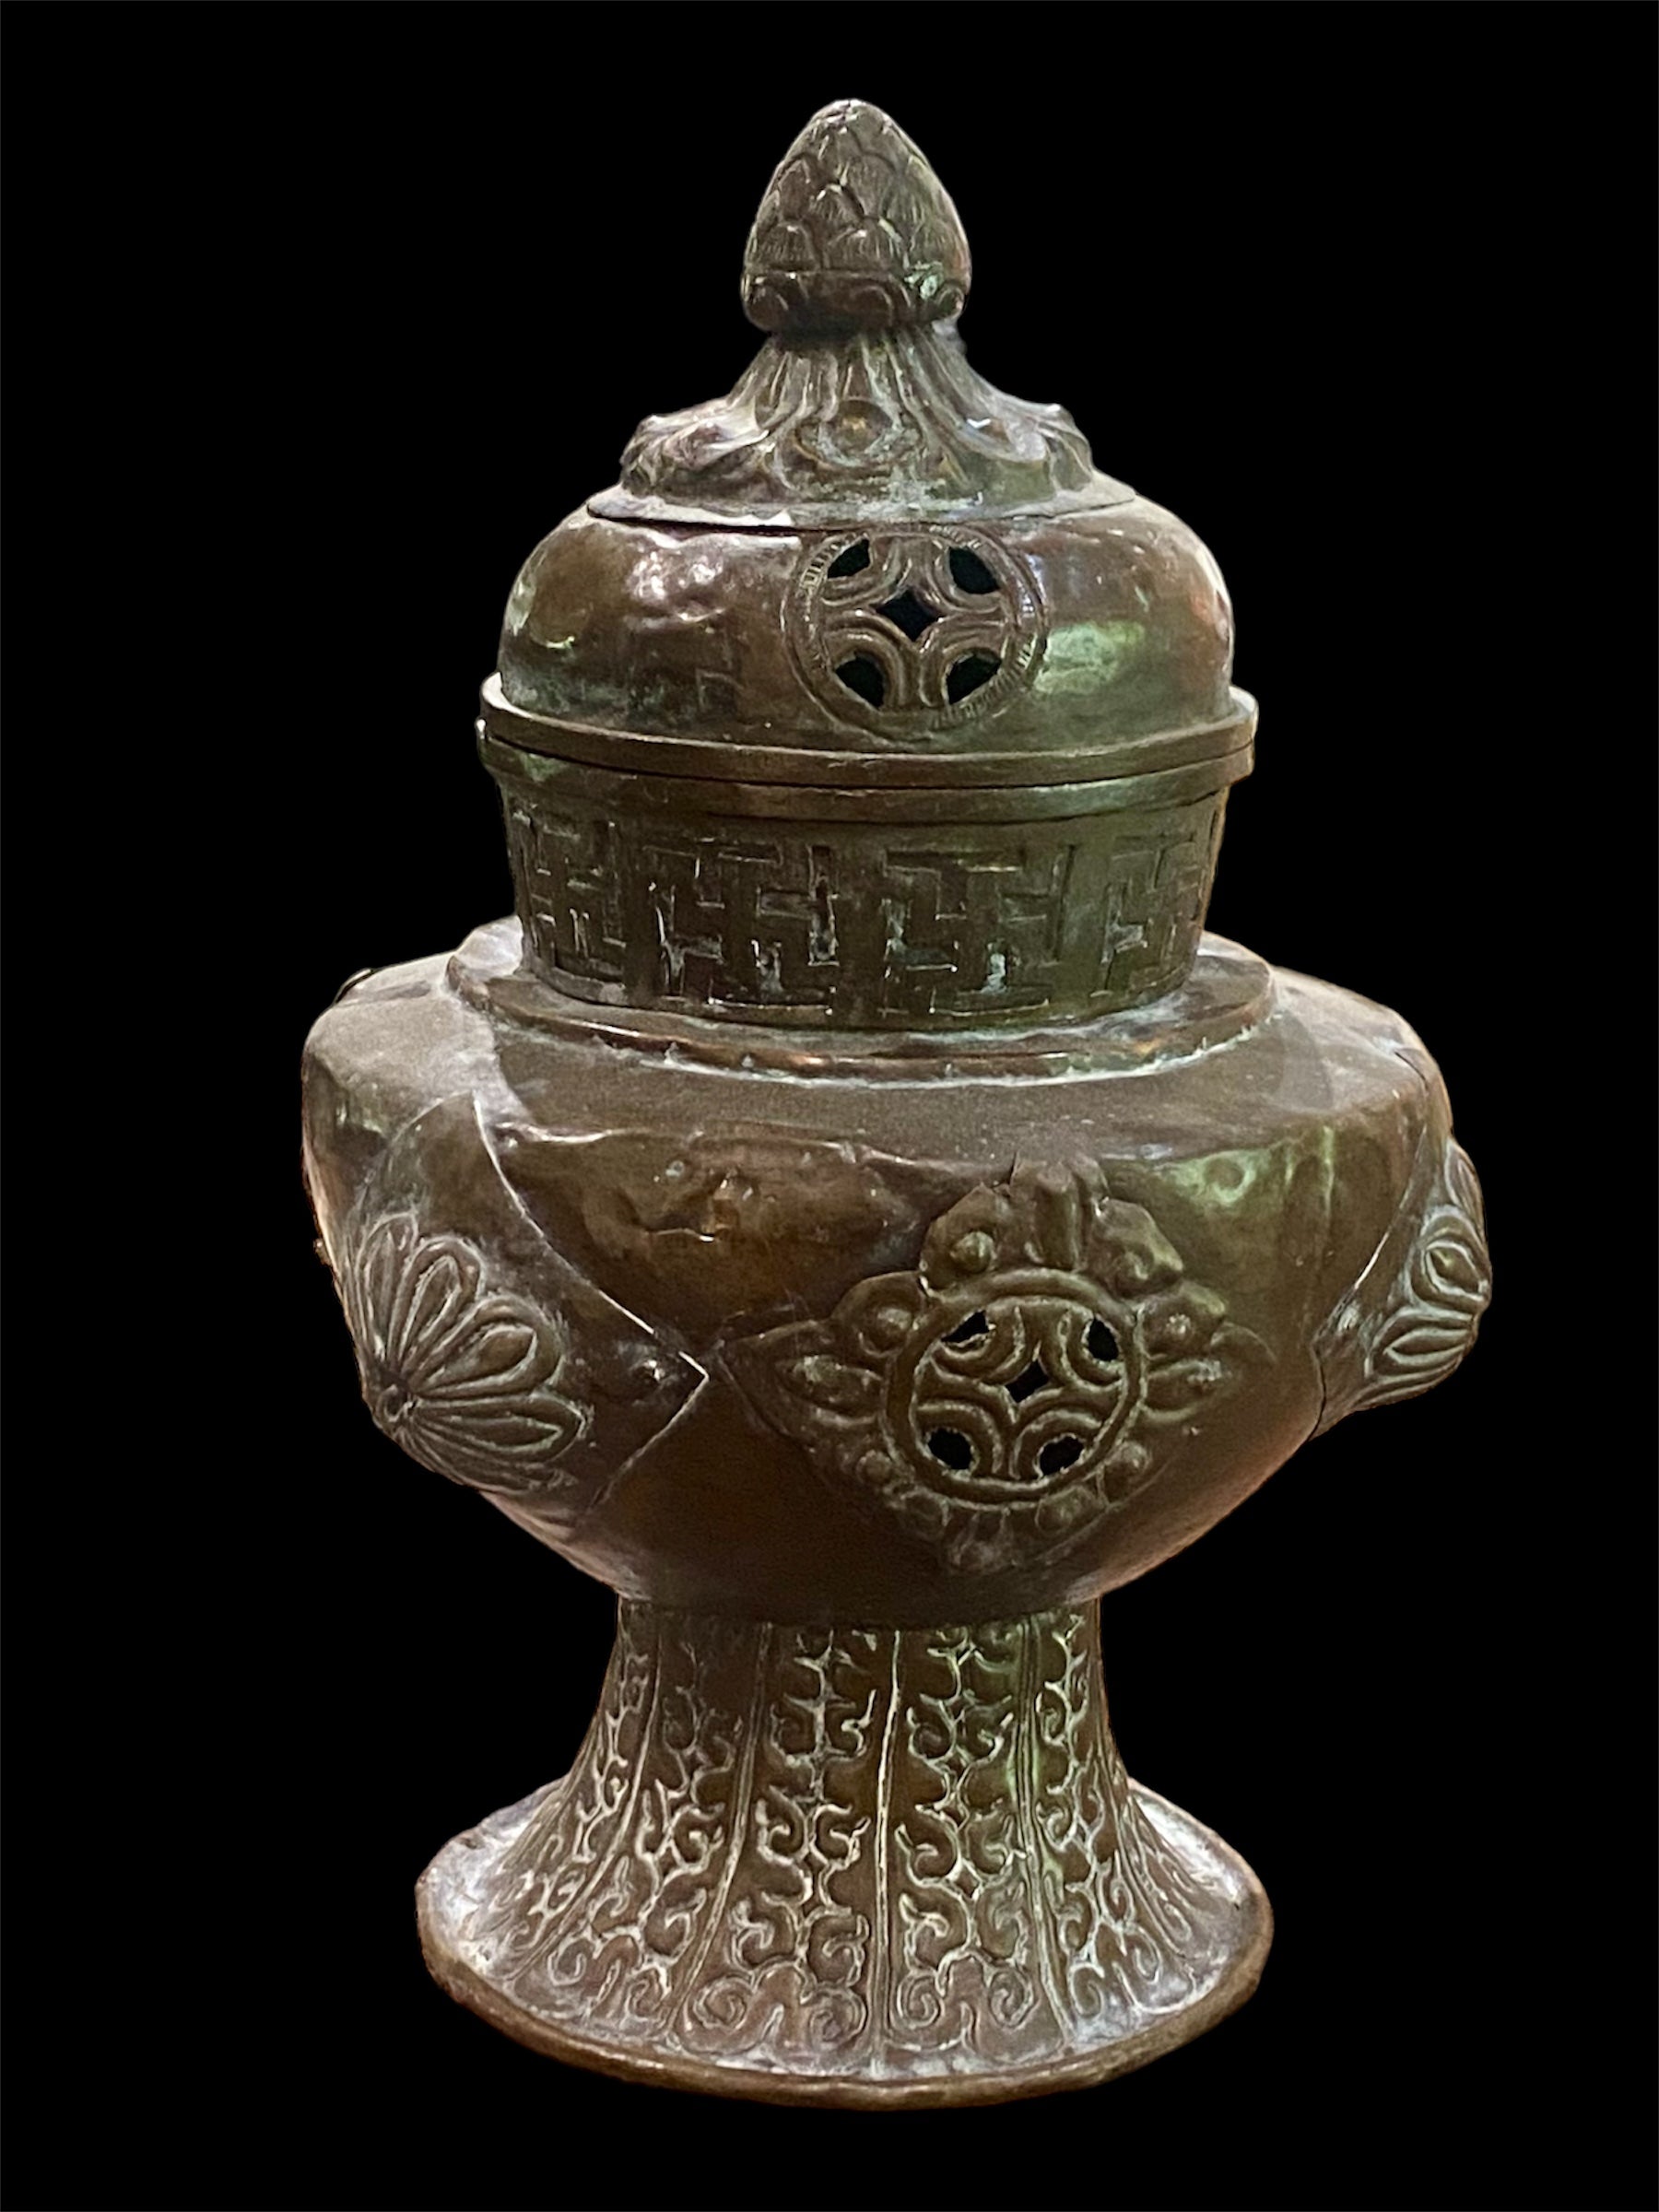 Handmade large incense burner. Pierced & footed pot with lid and inner tin to hold incense. Topped with lotus bud, ringed with viswa vajras, lotus buds, cloud spandrels and a frieze of swastikas. Hand beaten copper, mid 20th century. Collected by Bernard Heaphy in a village near Mount Everest. 31 cm h x 17 cm diameter